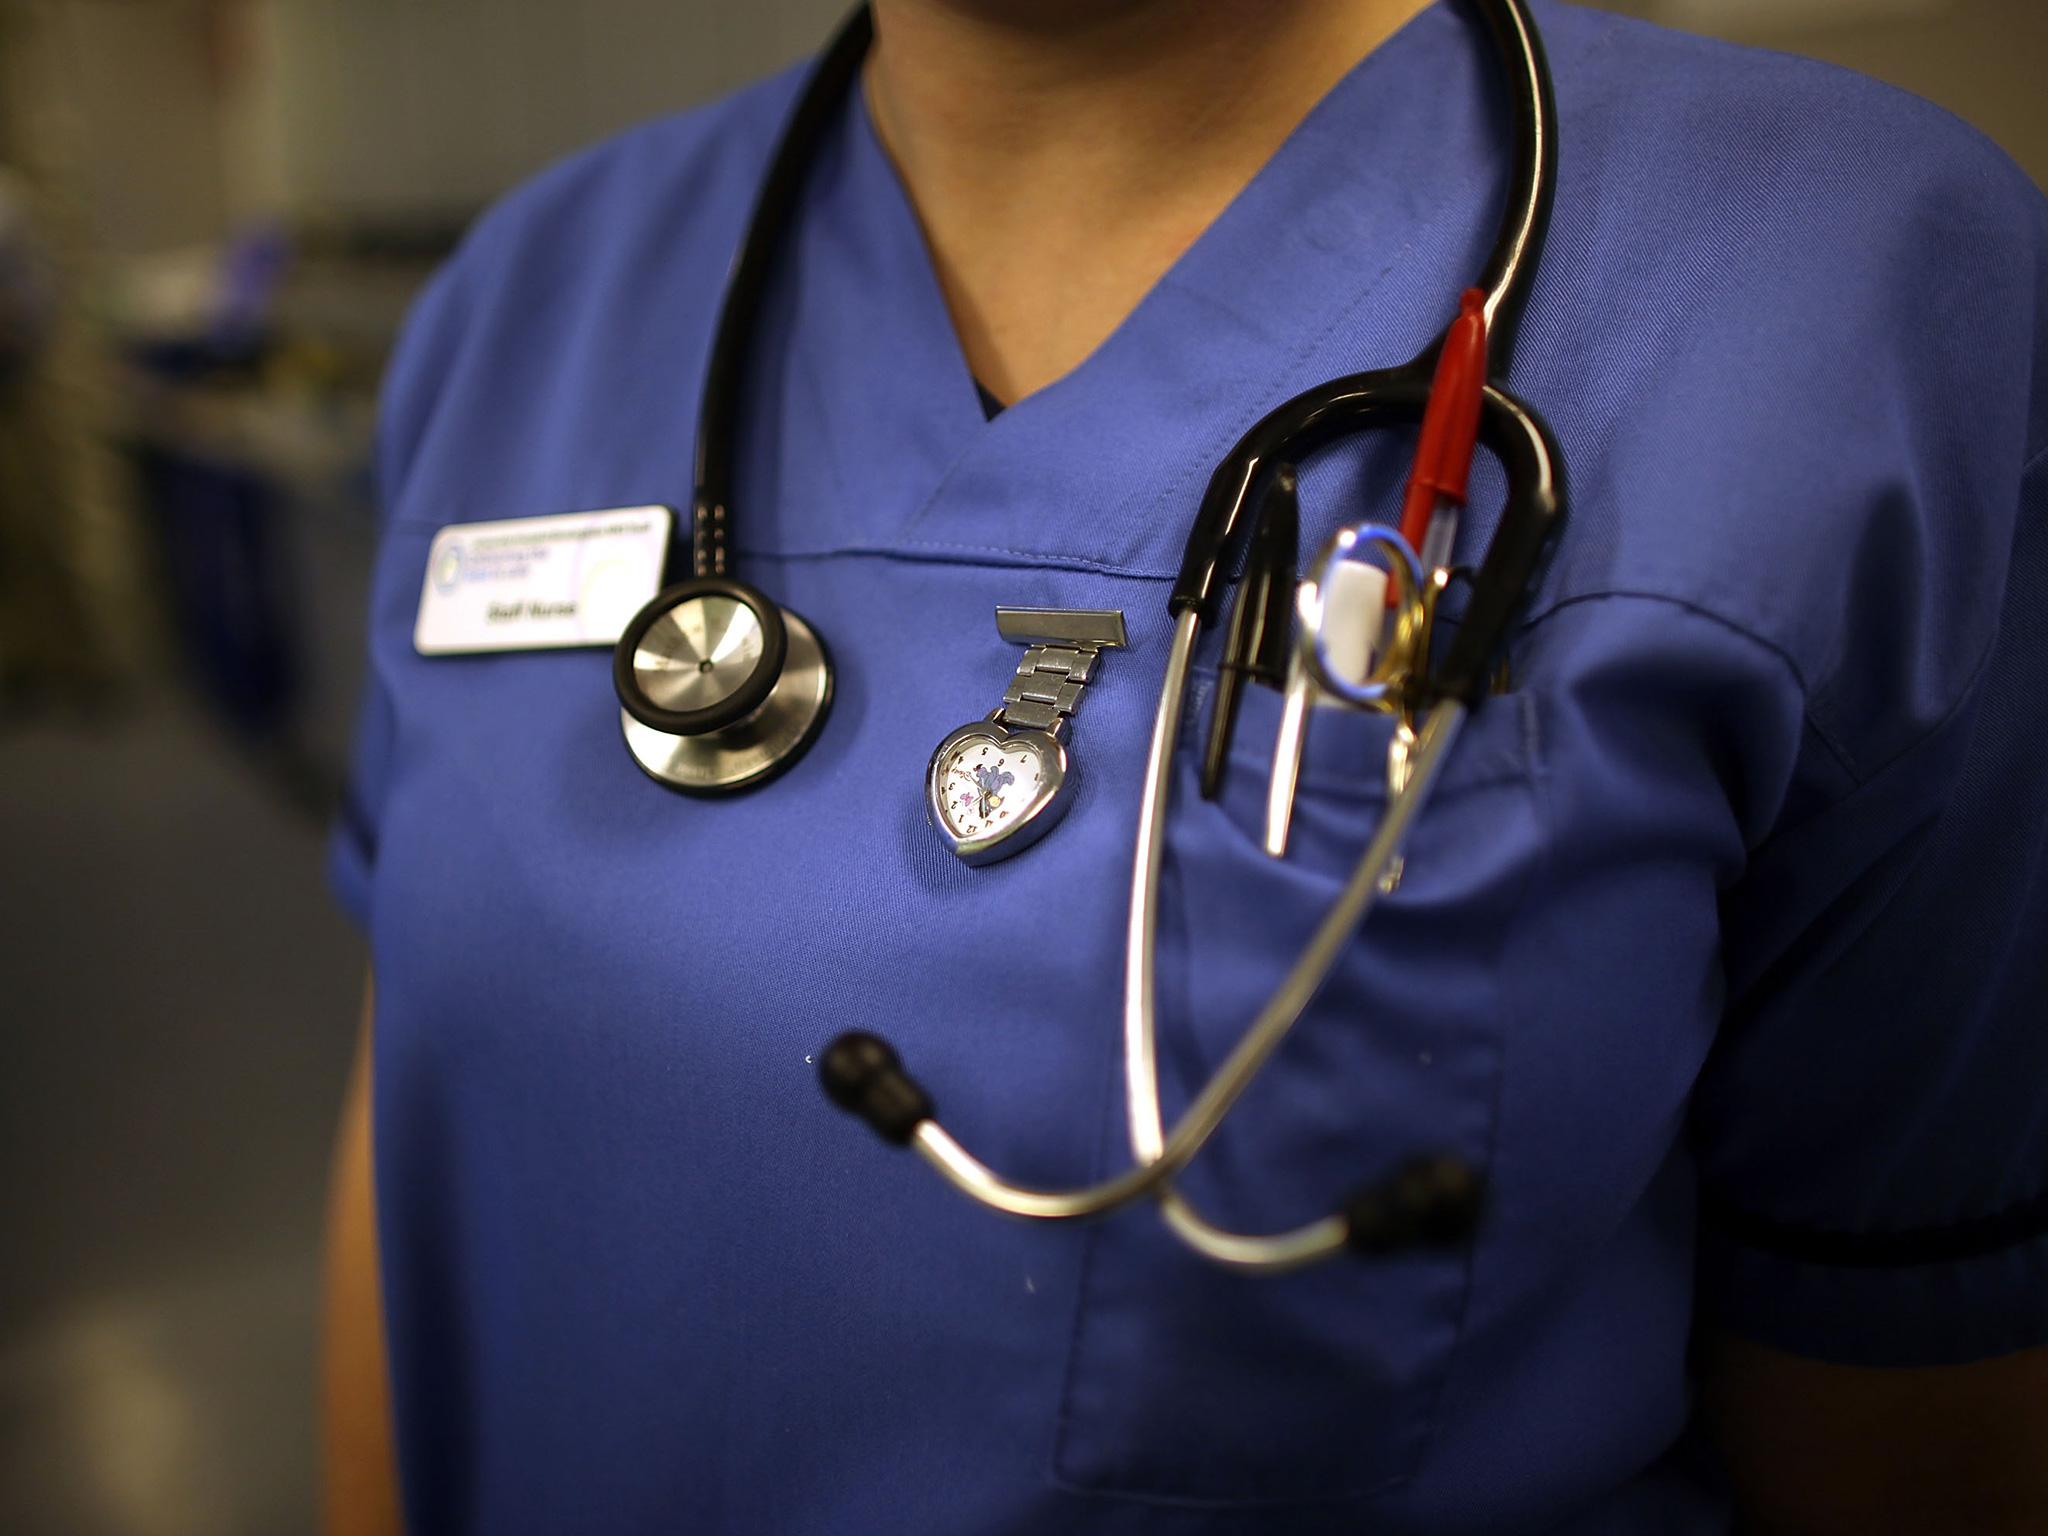 Nearly half of nurses say that risks to their safety have worsened in the past two years